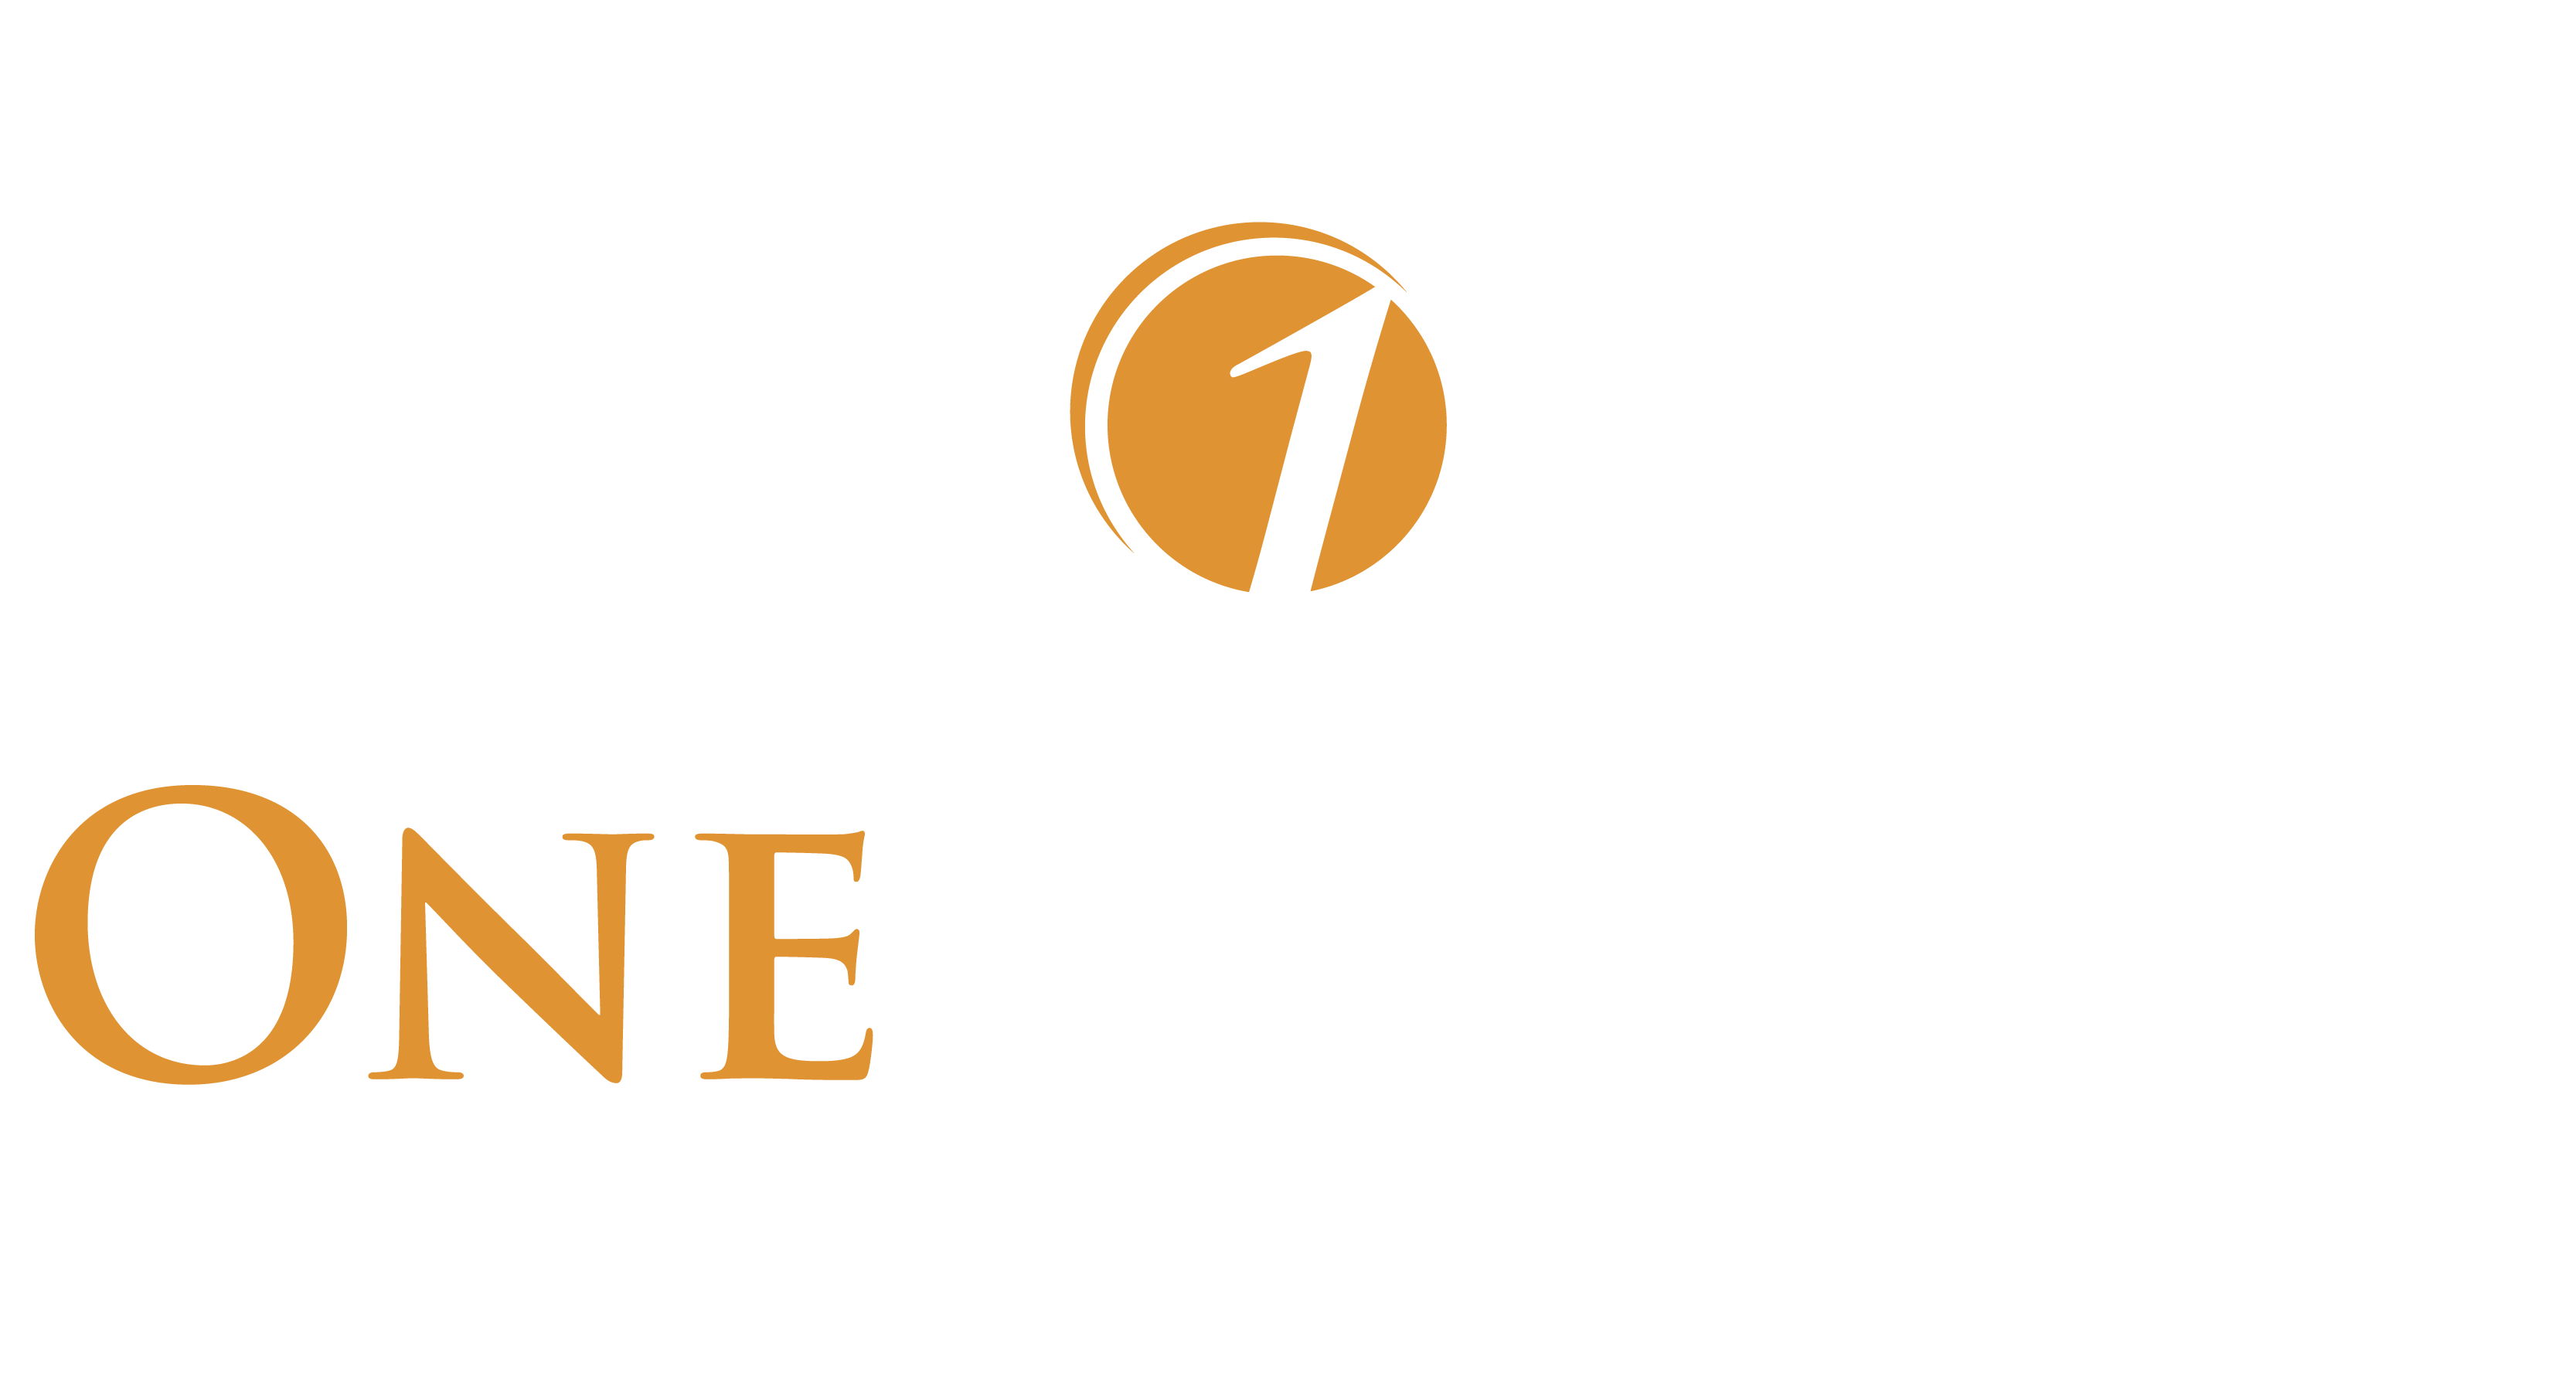 One Source Photography